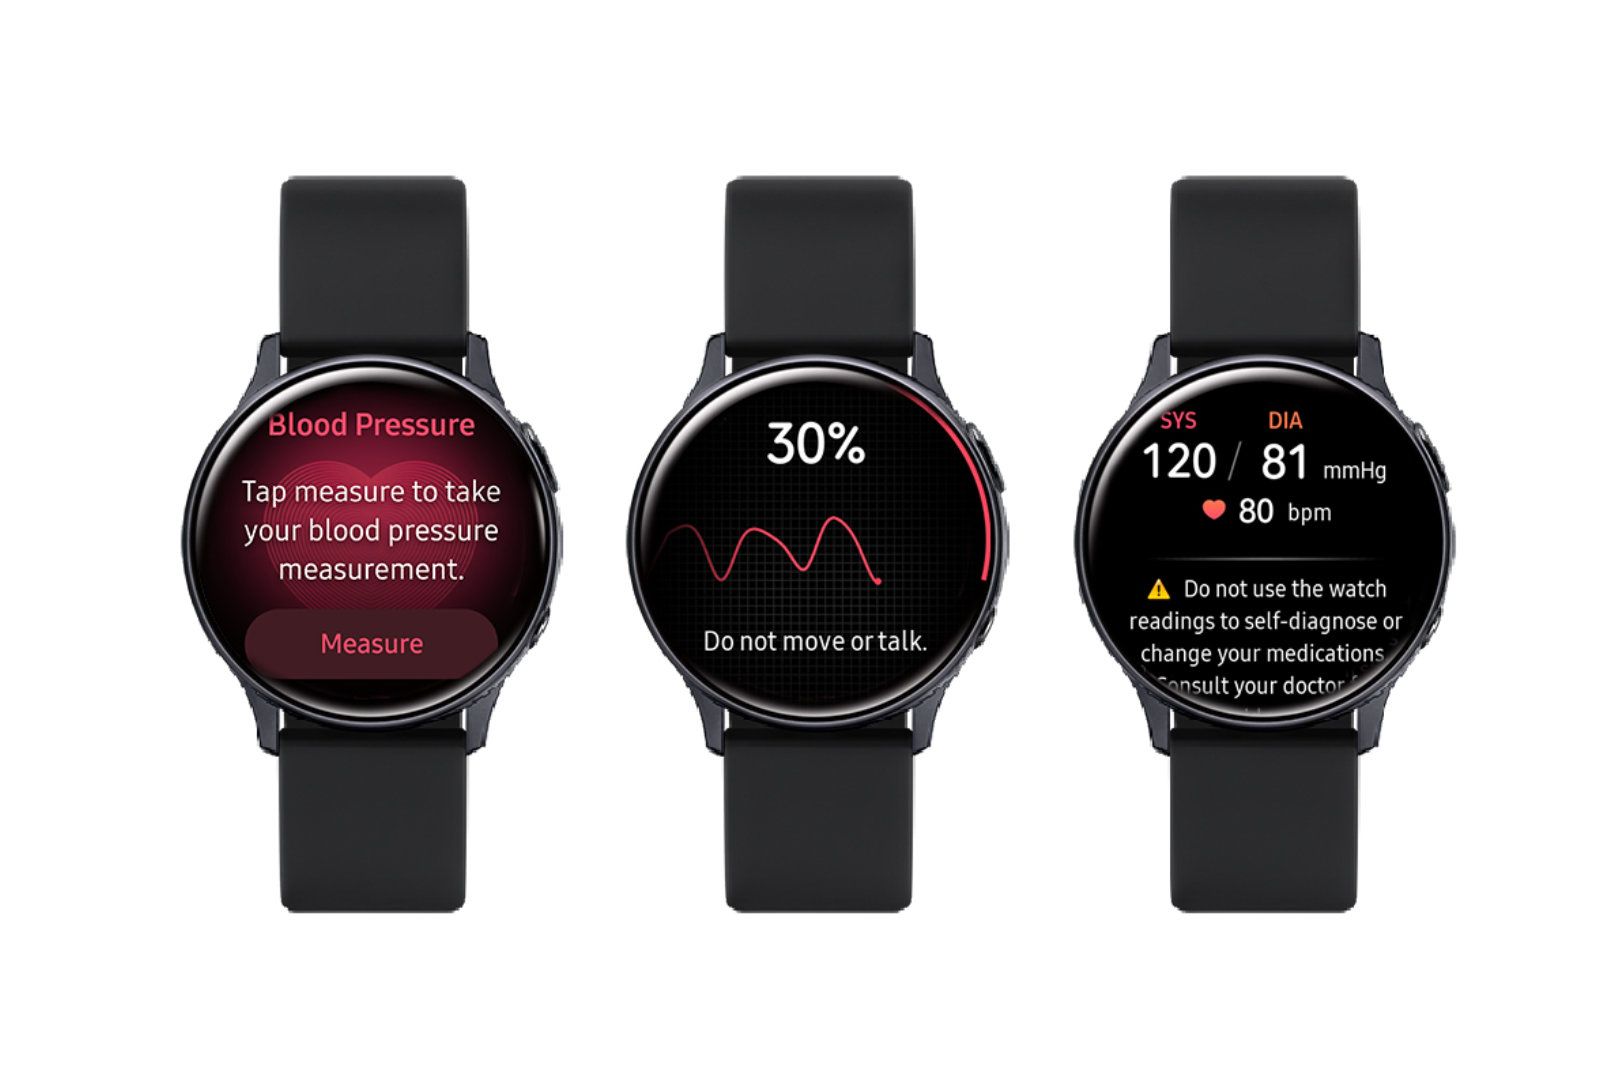 Samsung brings blood pressure monitoring to Galaxy Watch Active 2 with Health Monitor app image 1